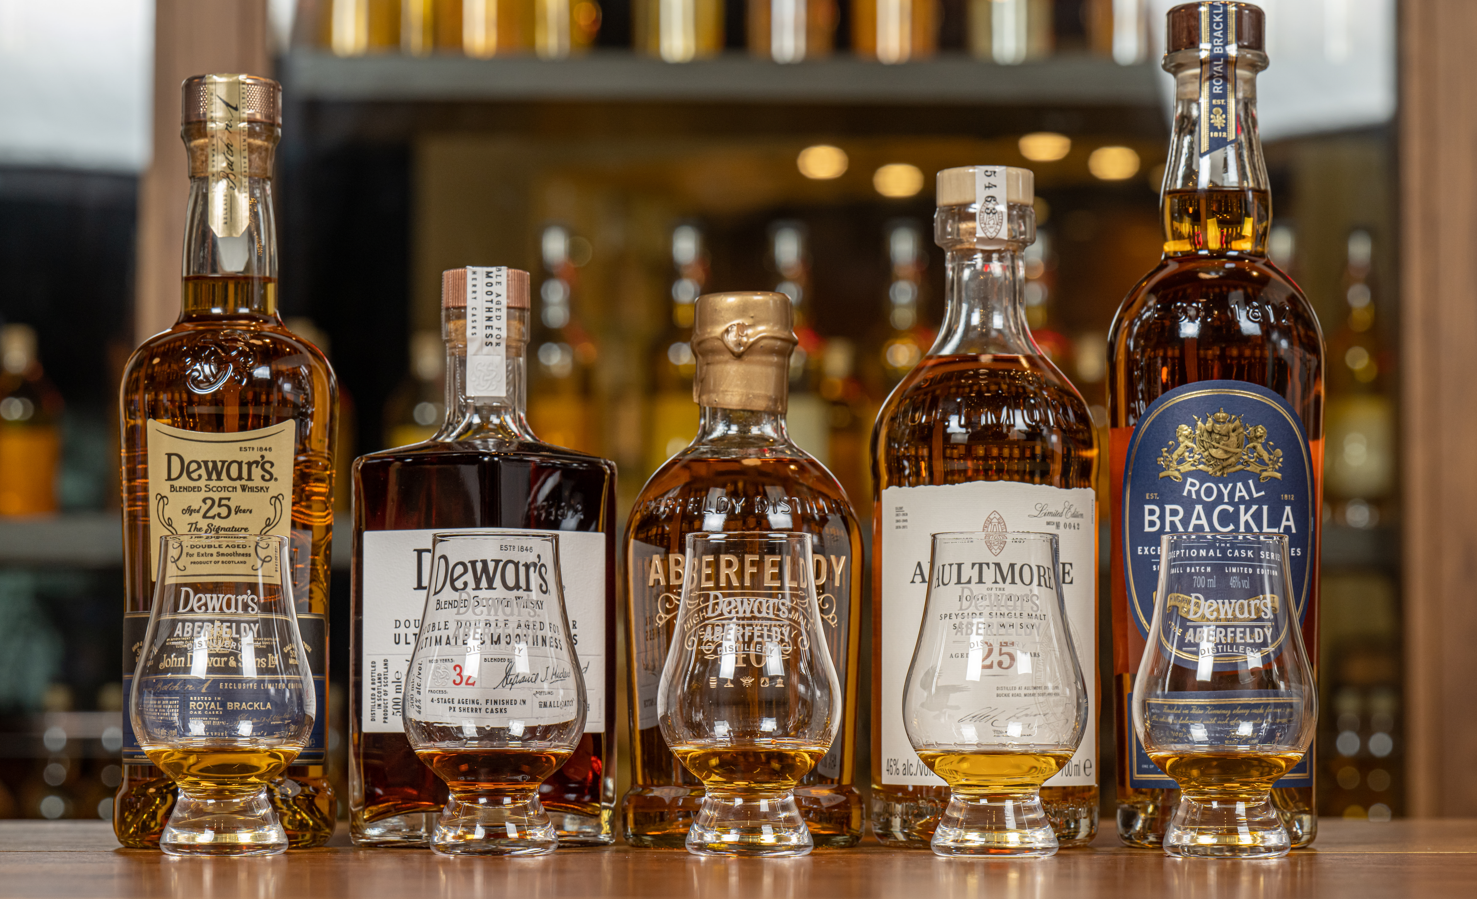 New year, new whisky experiences!